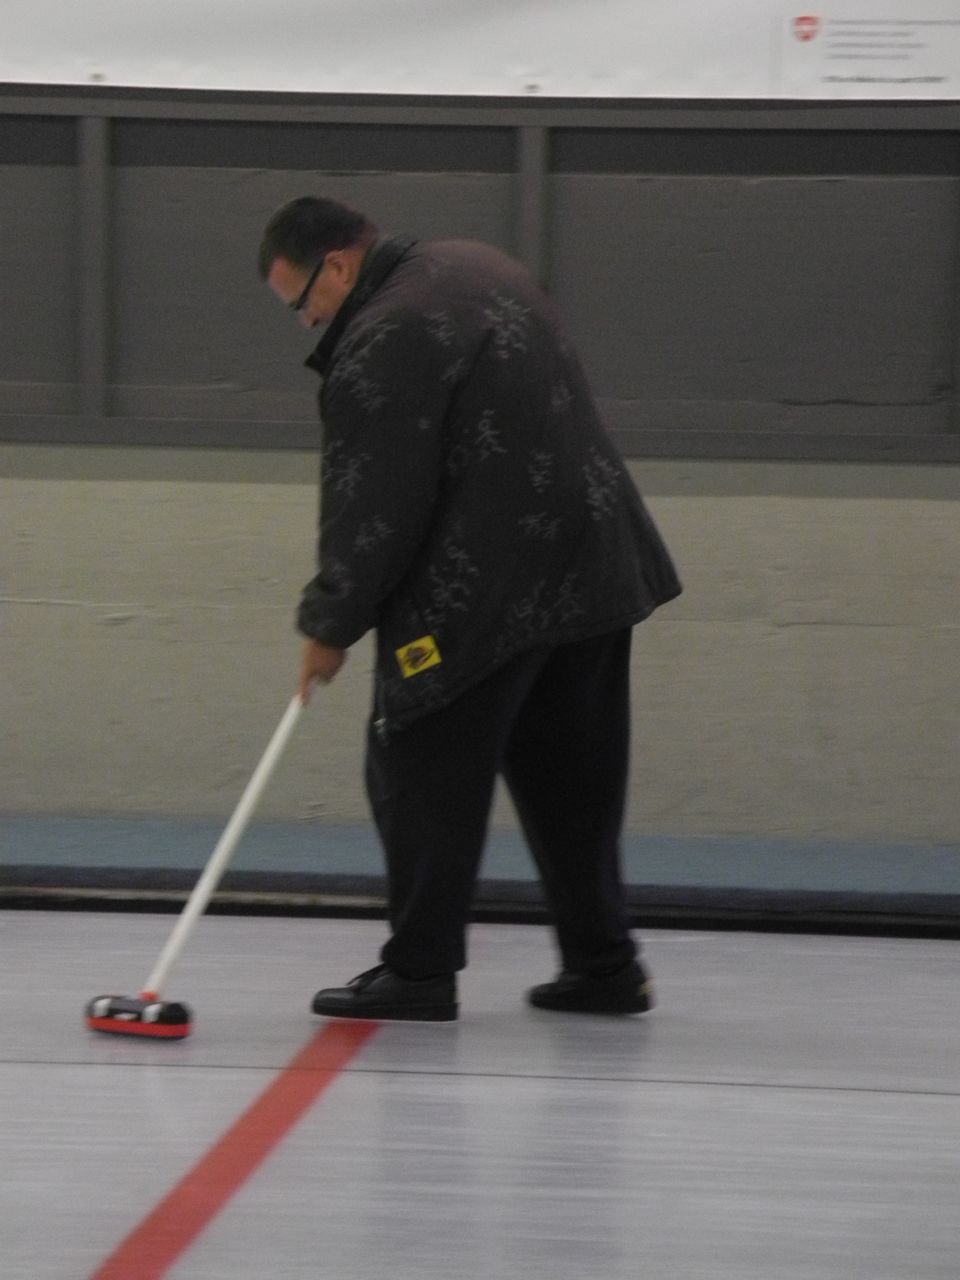 /photos/2013/S01_Curling/121011_2042-S01-MD_06.jpg